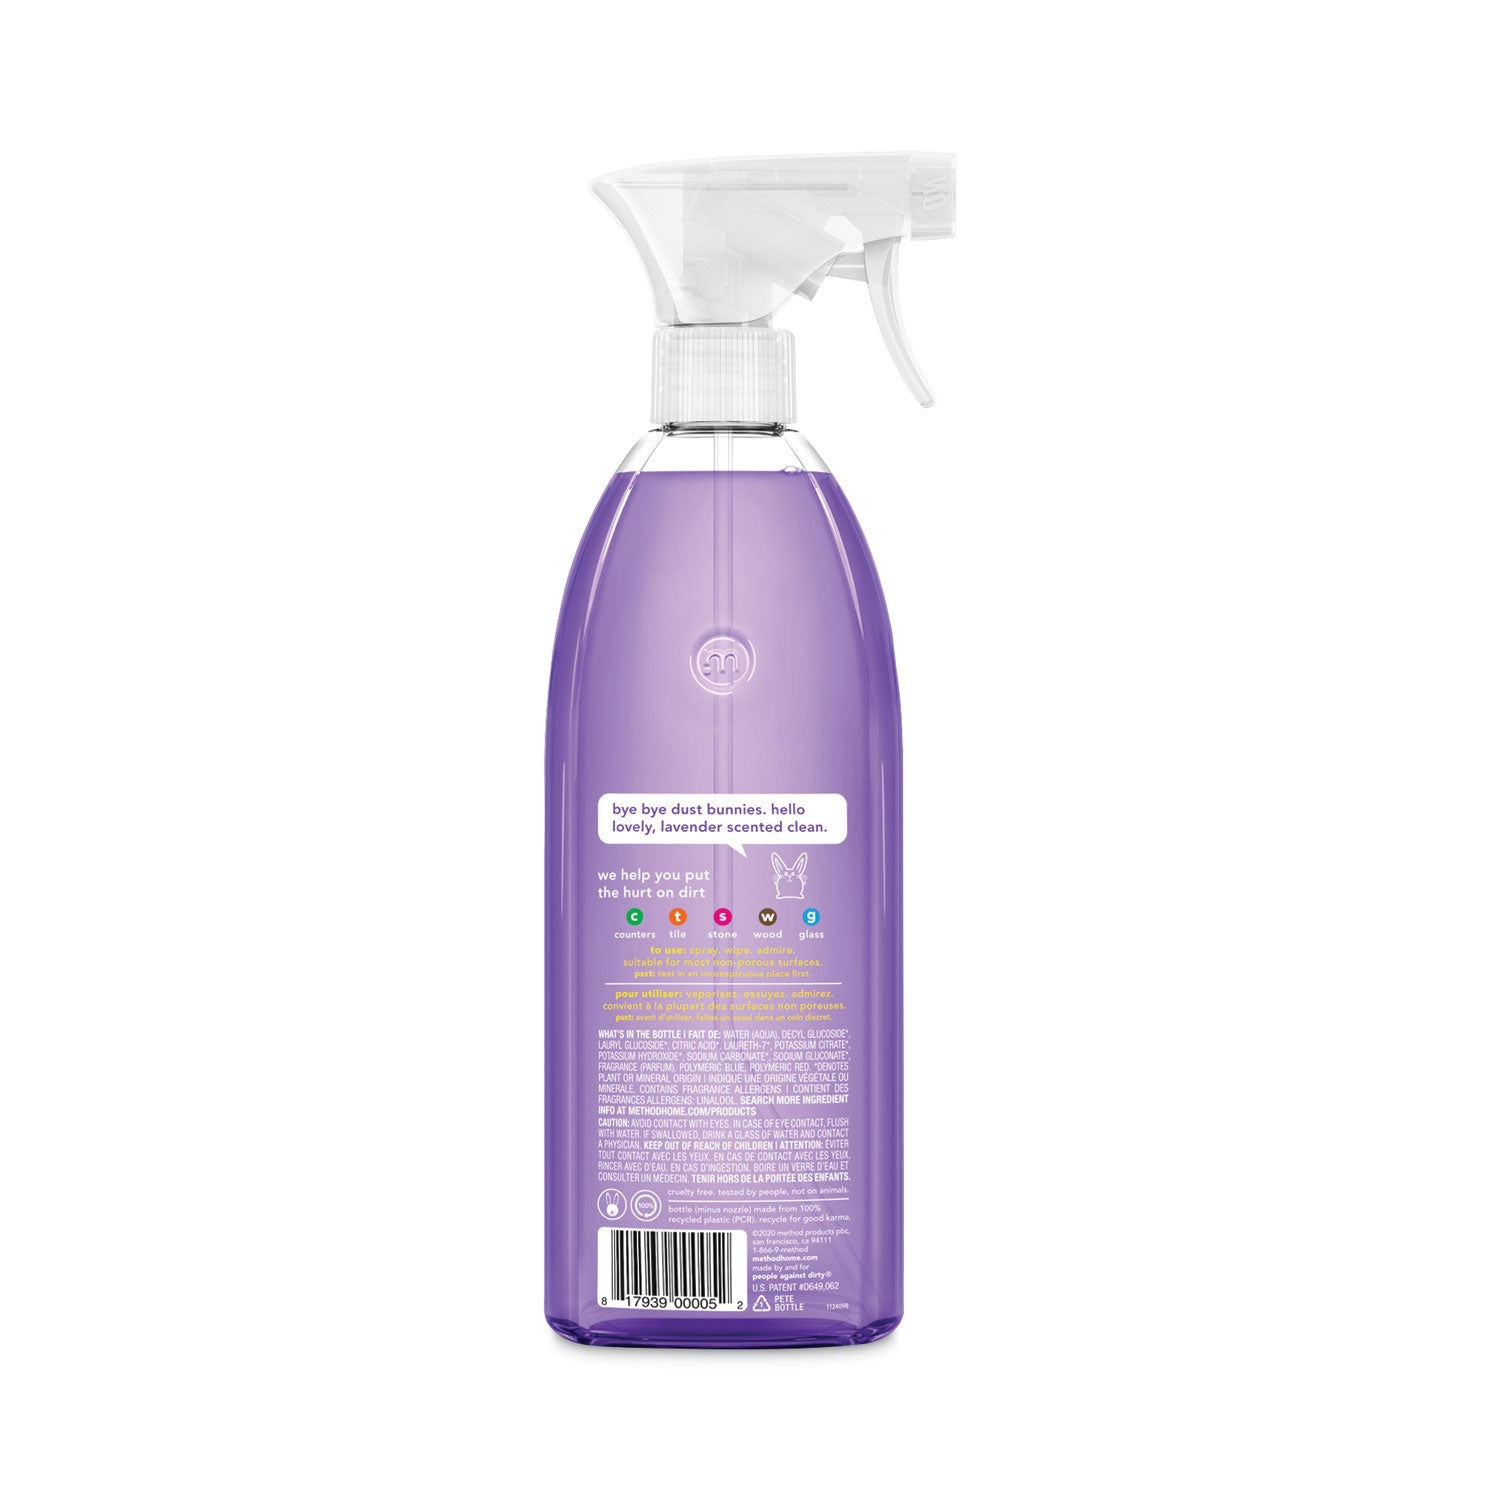 All-Purpose Cleaner, French Lavender, 28 oz Spray Bottle - 